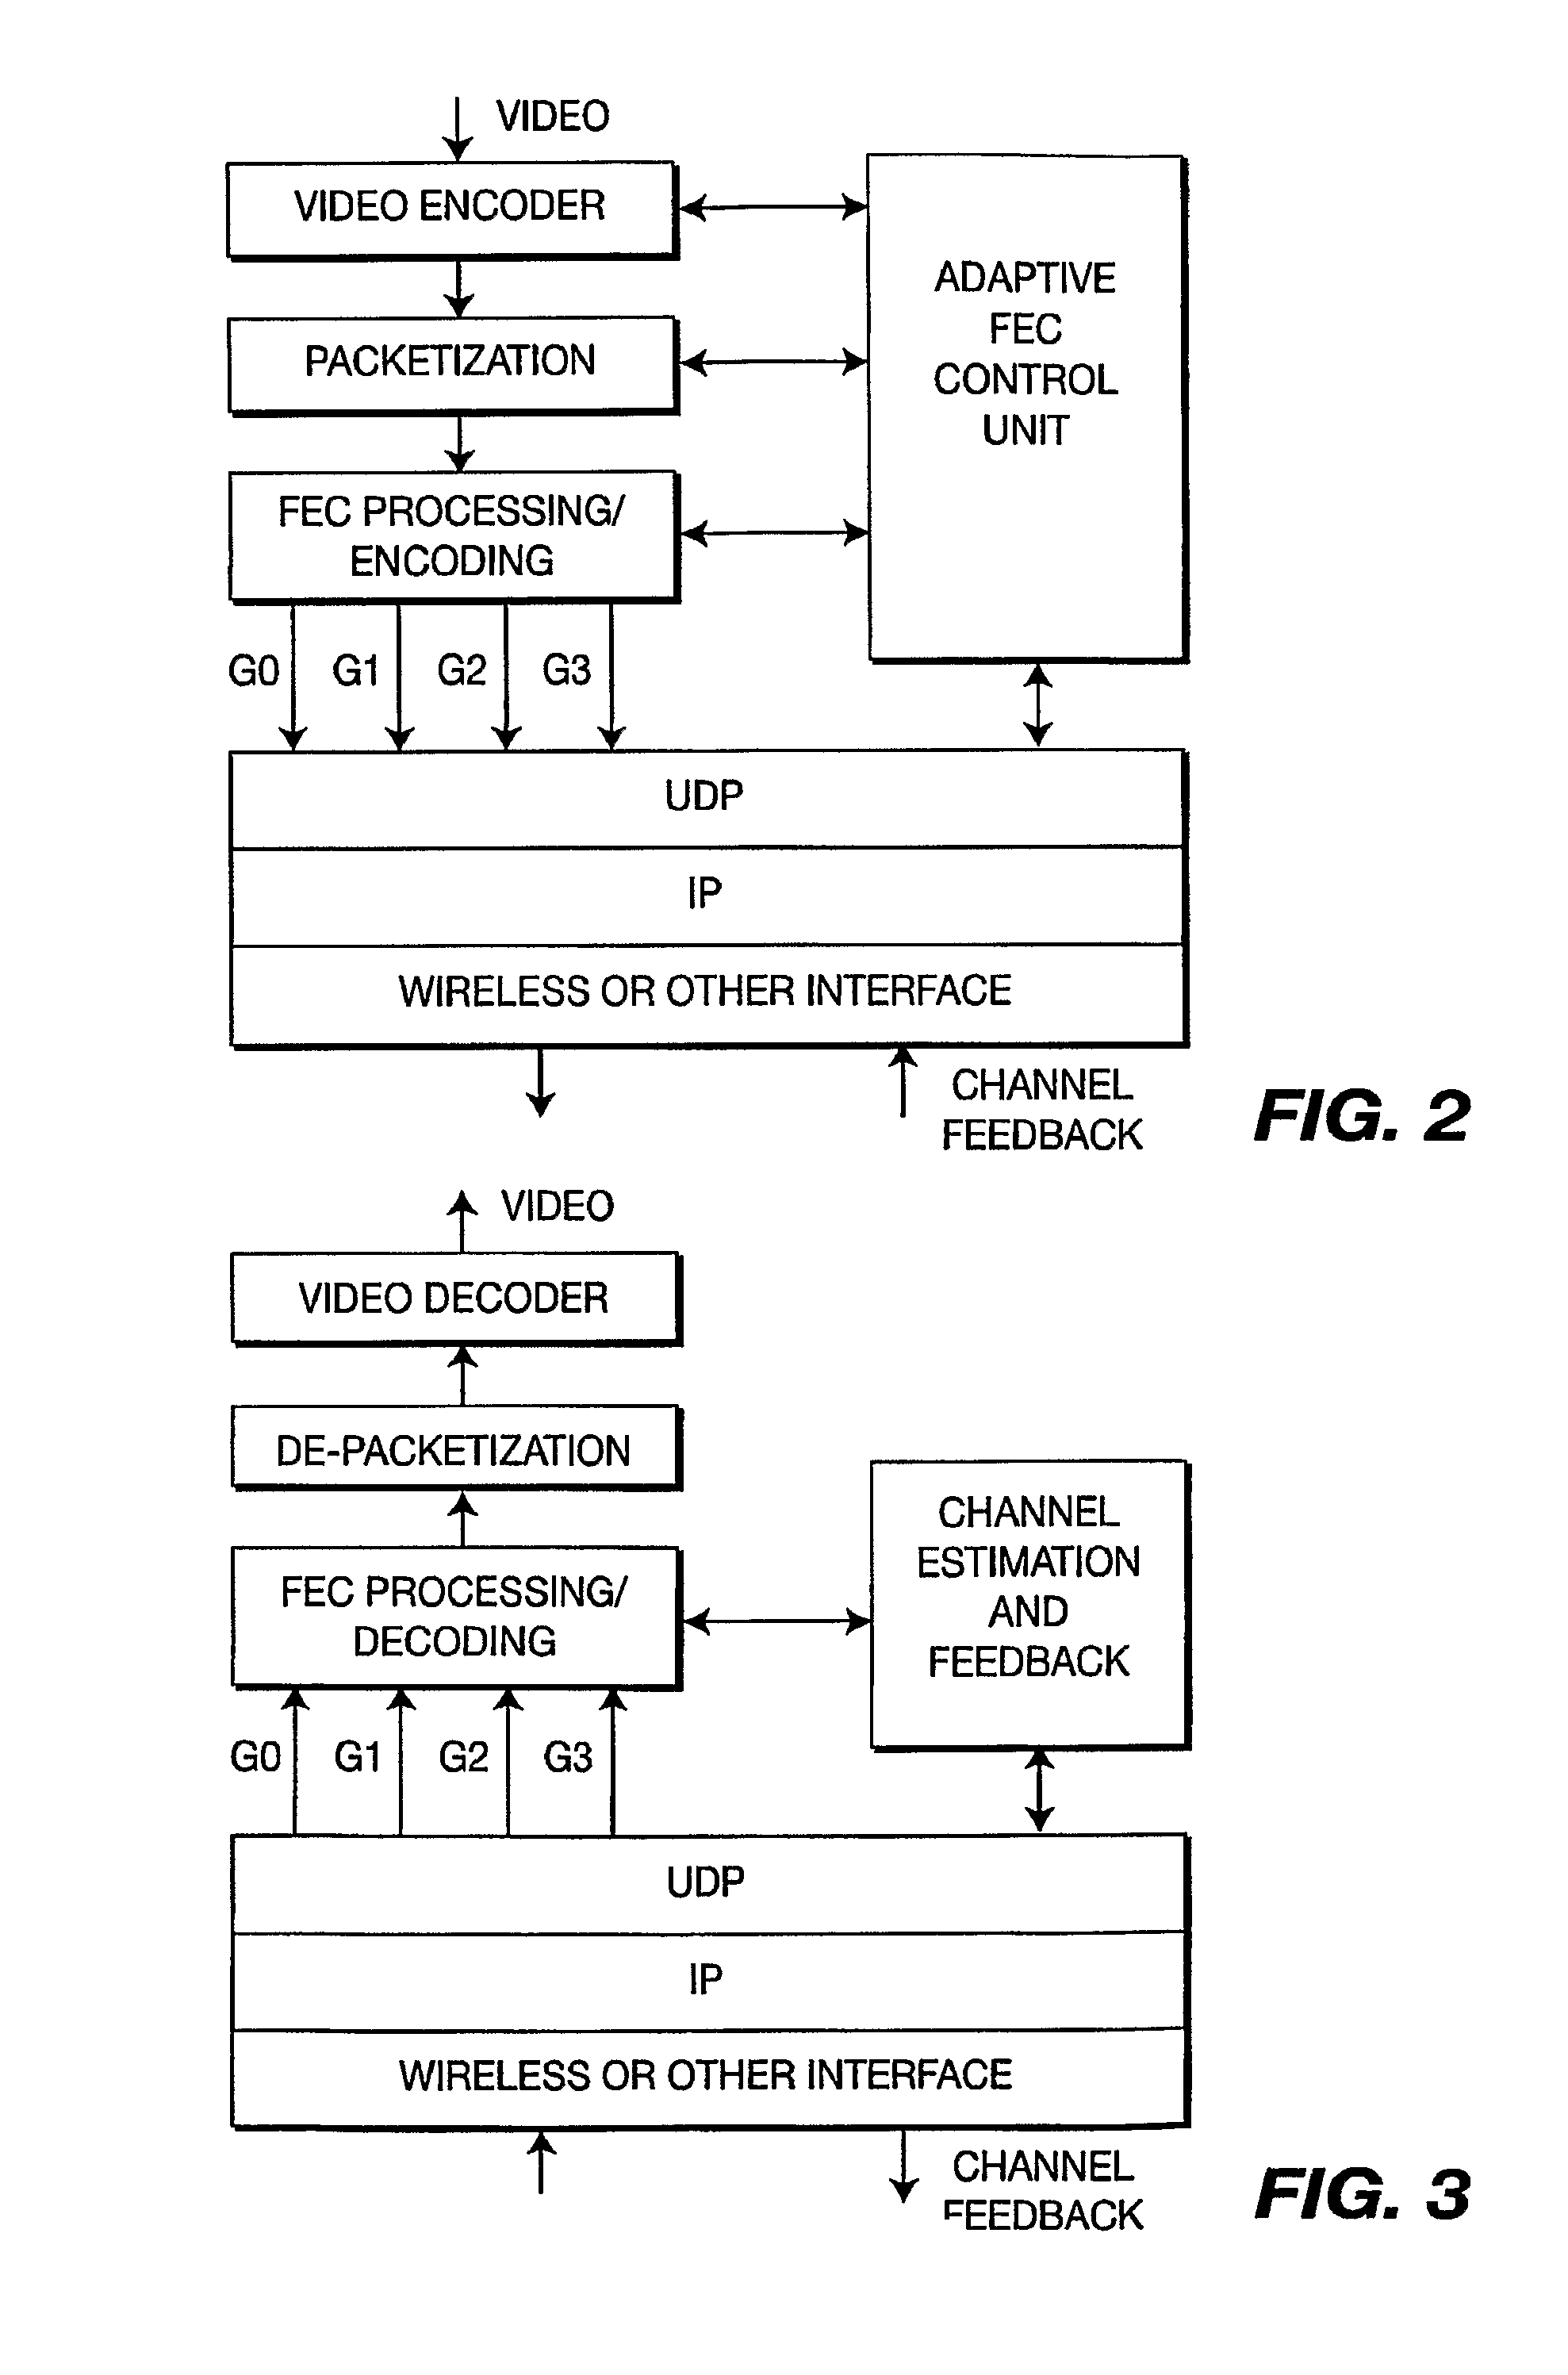 Method for efficient feedback of receiving channel conditions in adaptive video multicast and broadcast systems